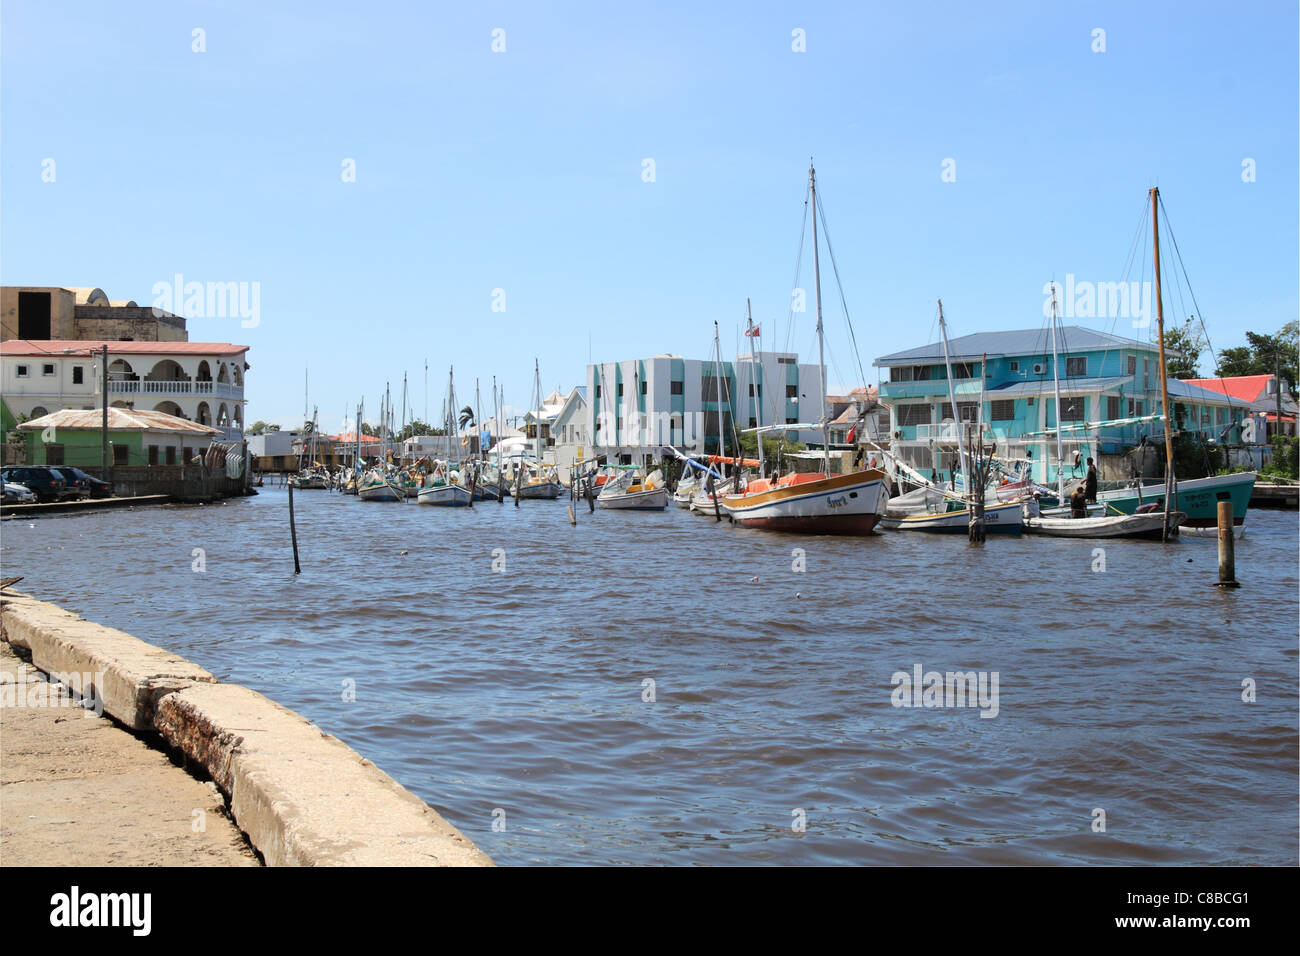 Boats on Haulover Creek, Fort George, Belize City, Belize, Caribbean, Central America Stock Photo